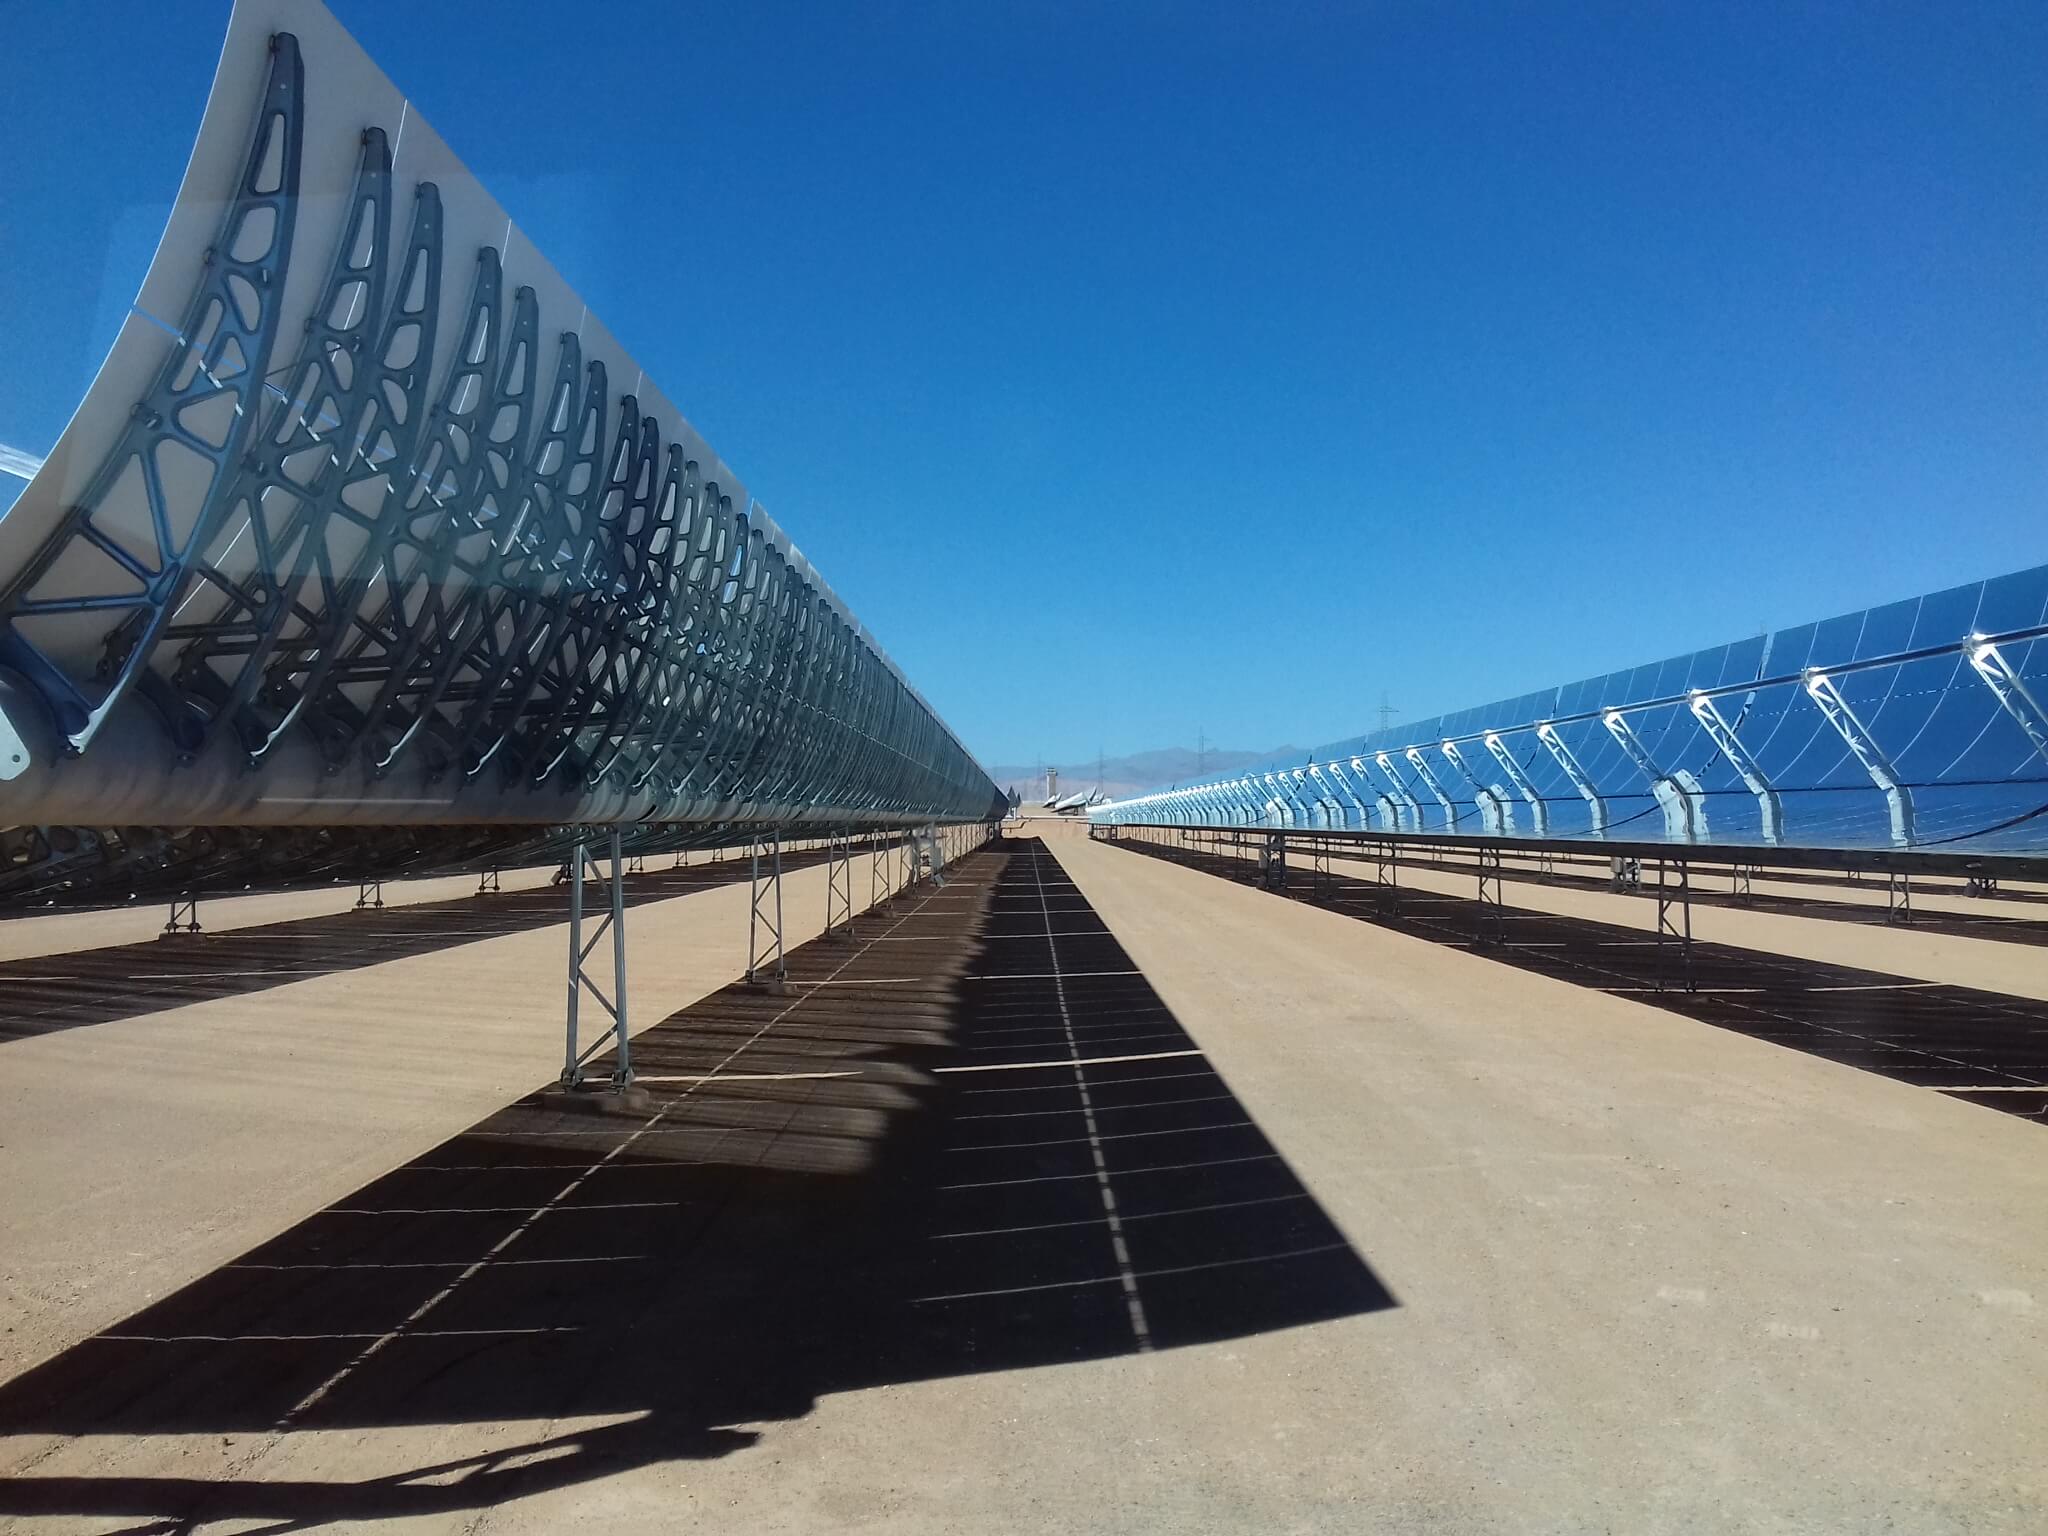 Section of a parabolic trough power plant near the town of Ouazazate in Morocco